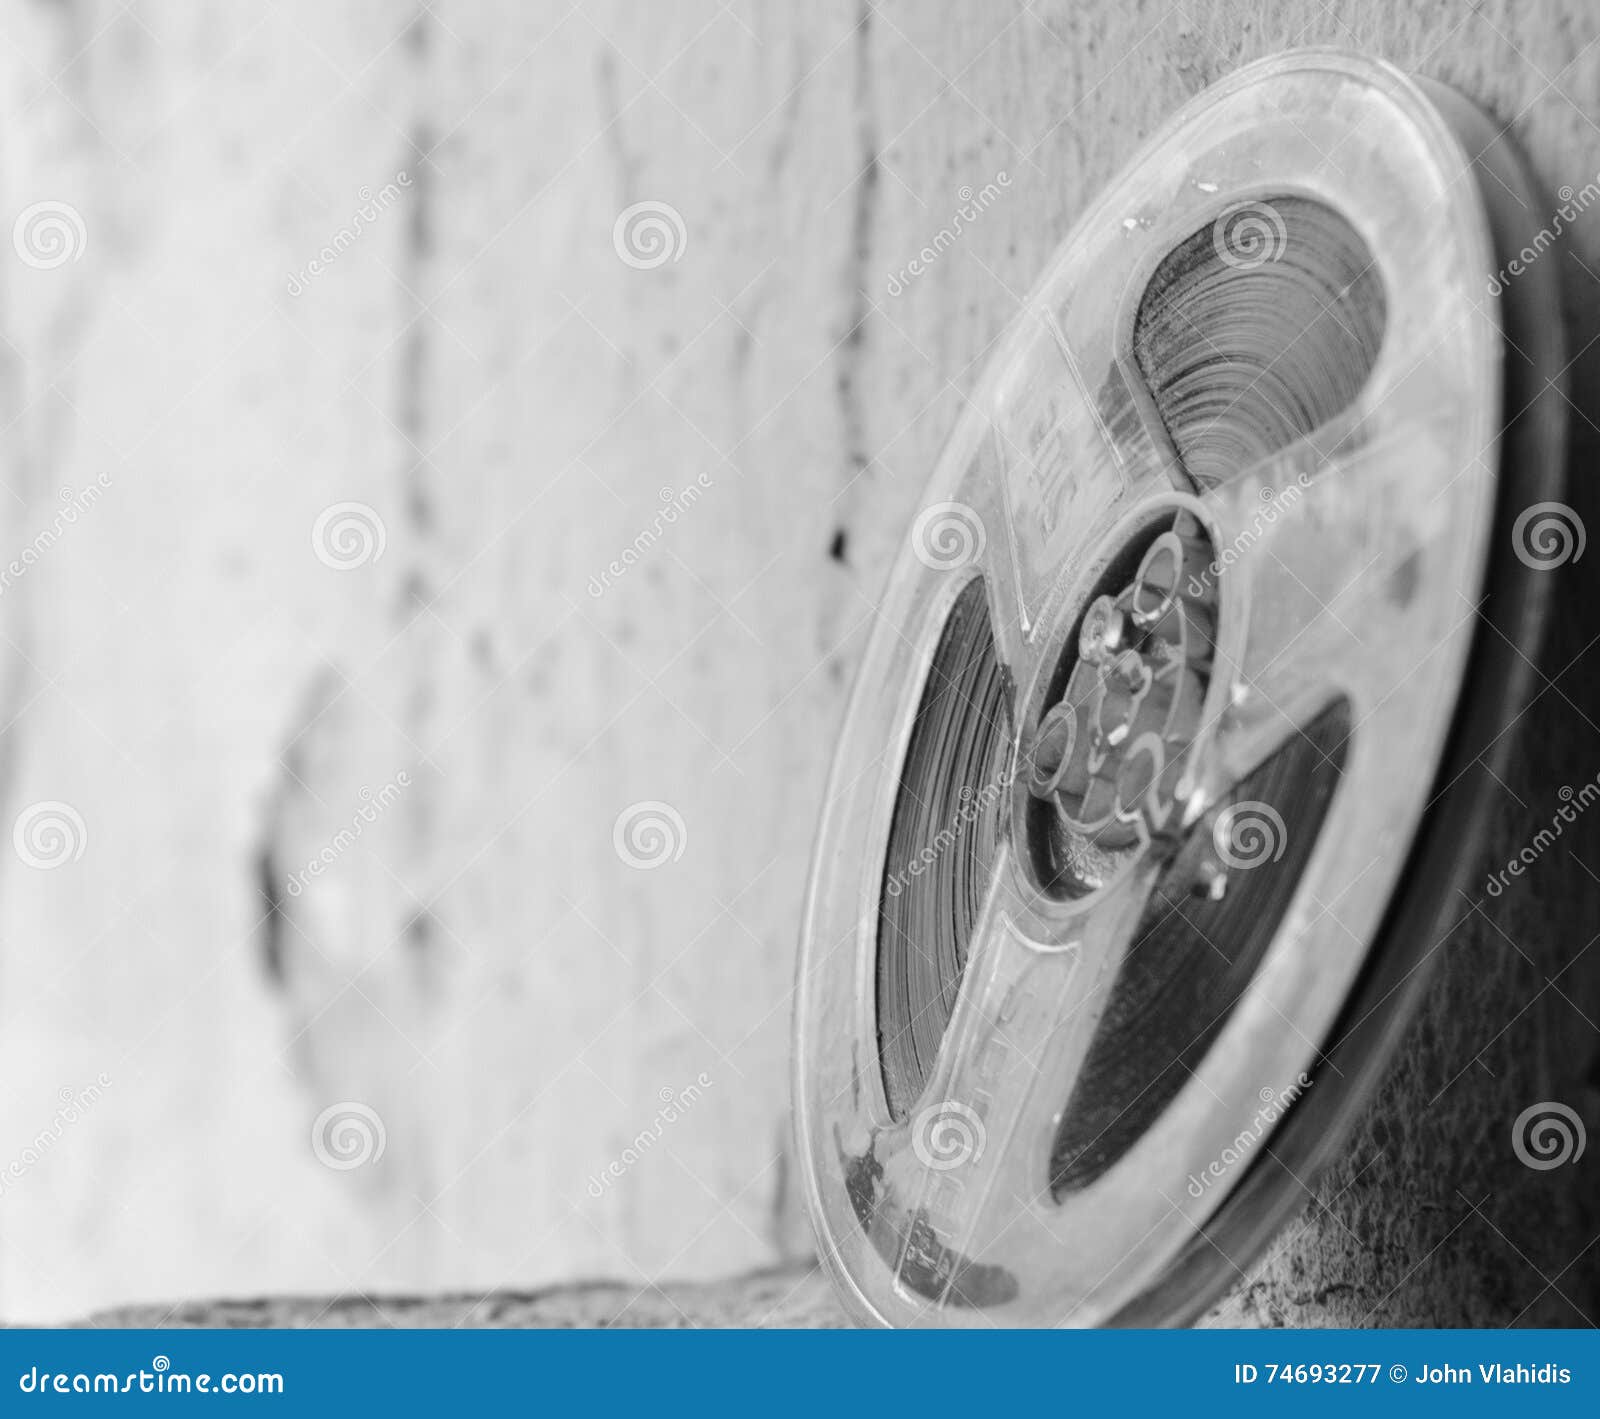 Film reel stock image. Image of countdown, canister, reel - 74693277